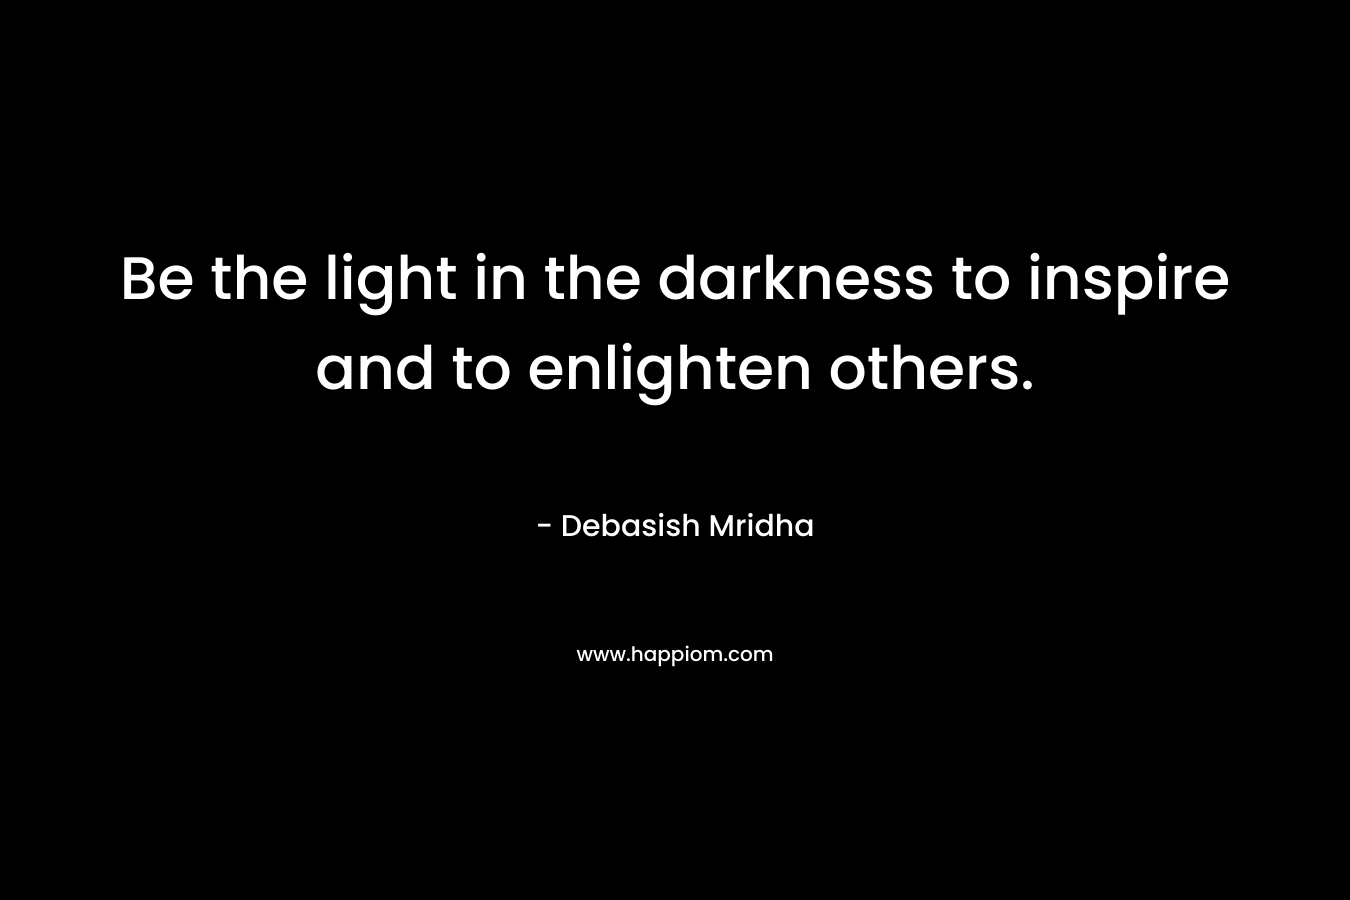 Be the light in the darkness to inspire and to enlighten others. – Debasish Mridha